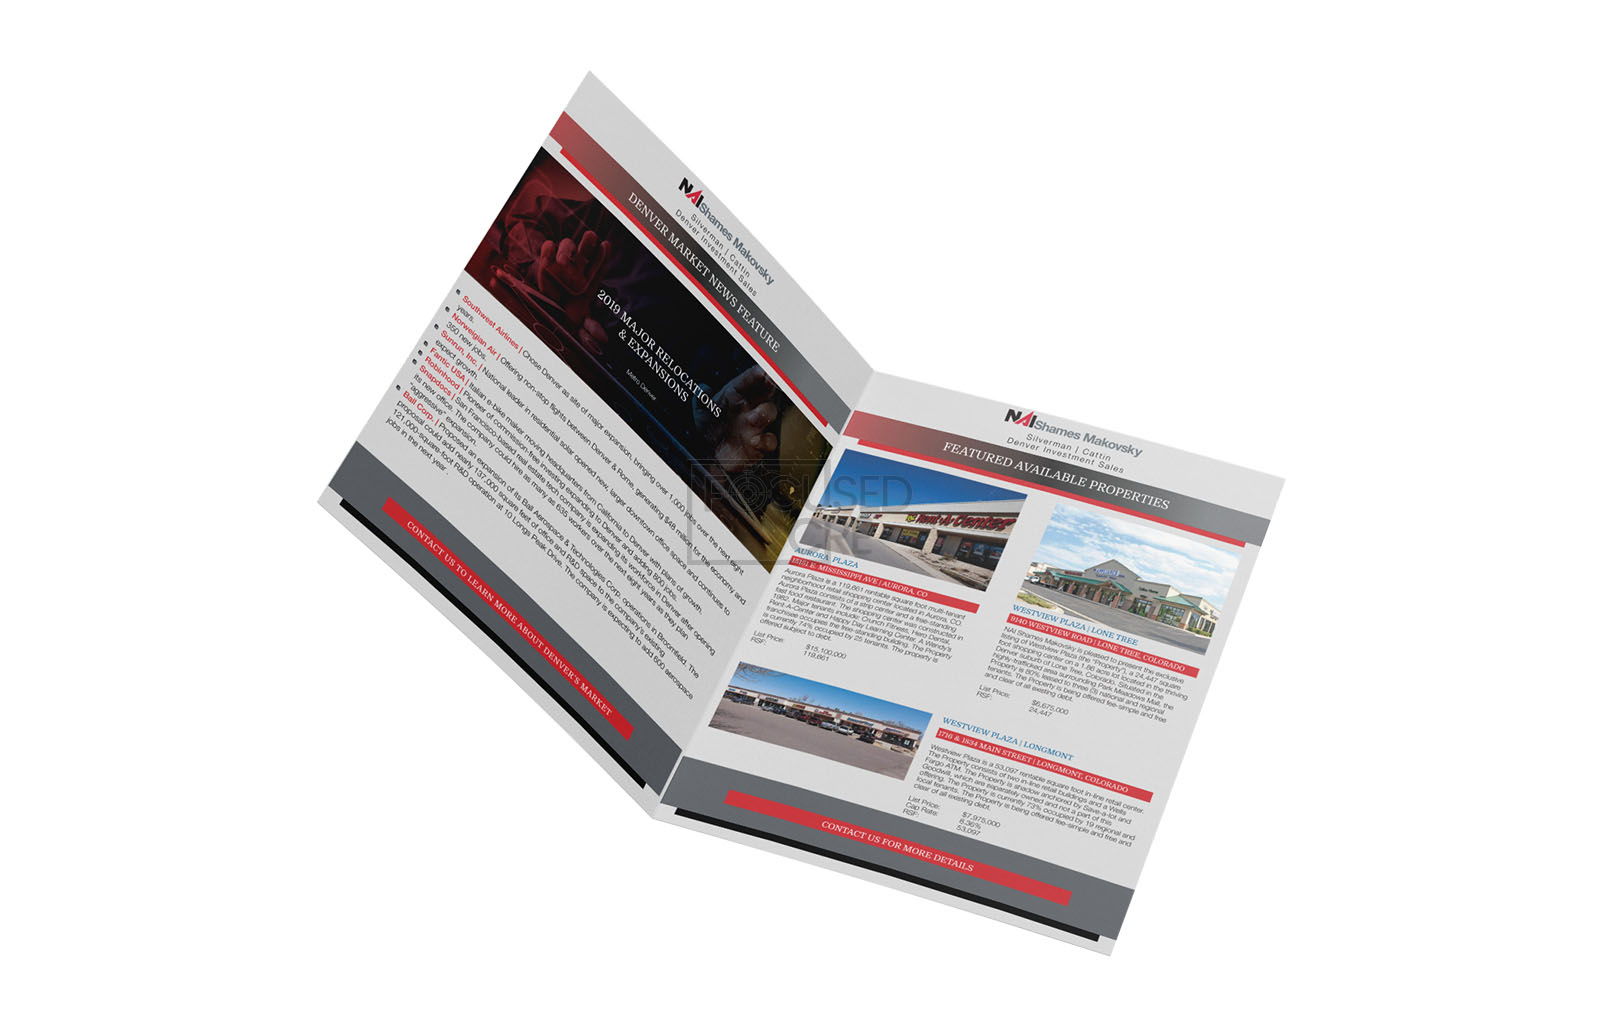 Quarterly Reports Newsletter template design